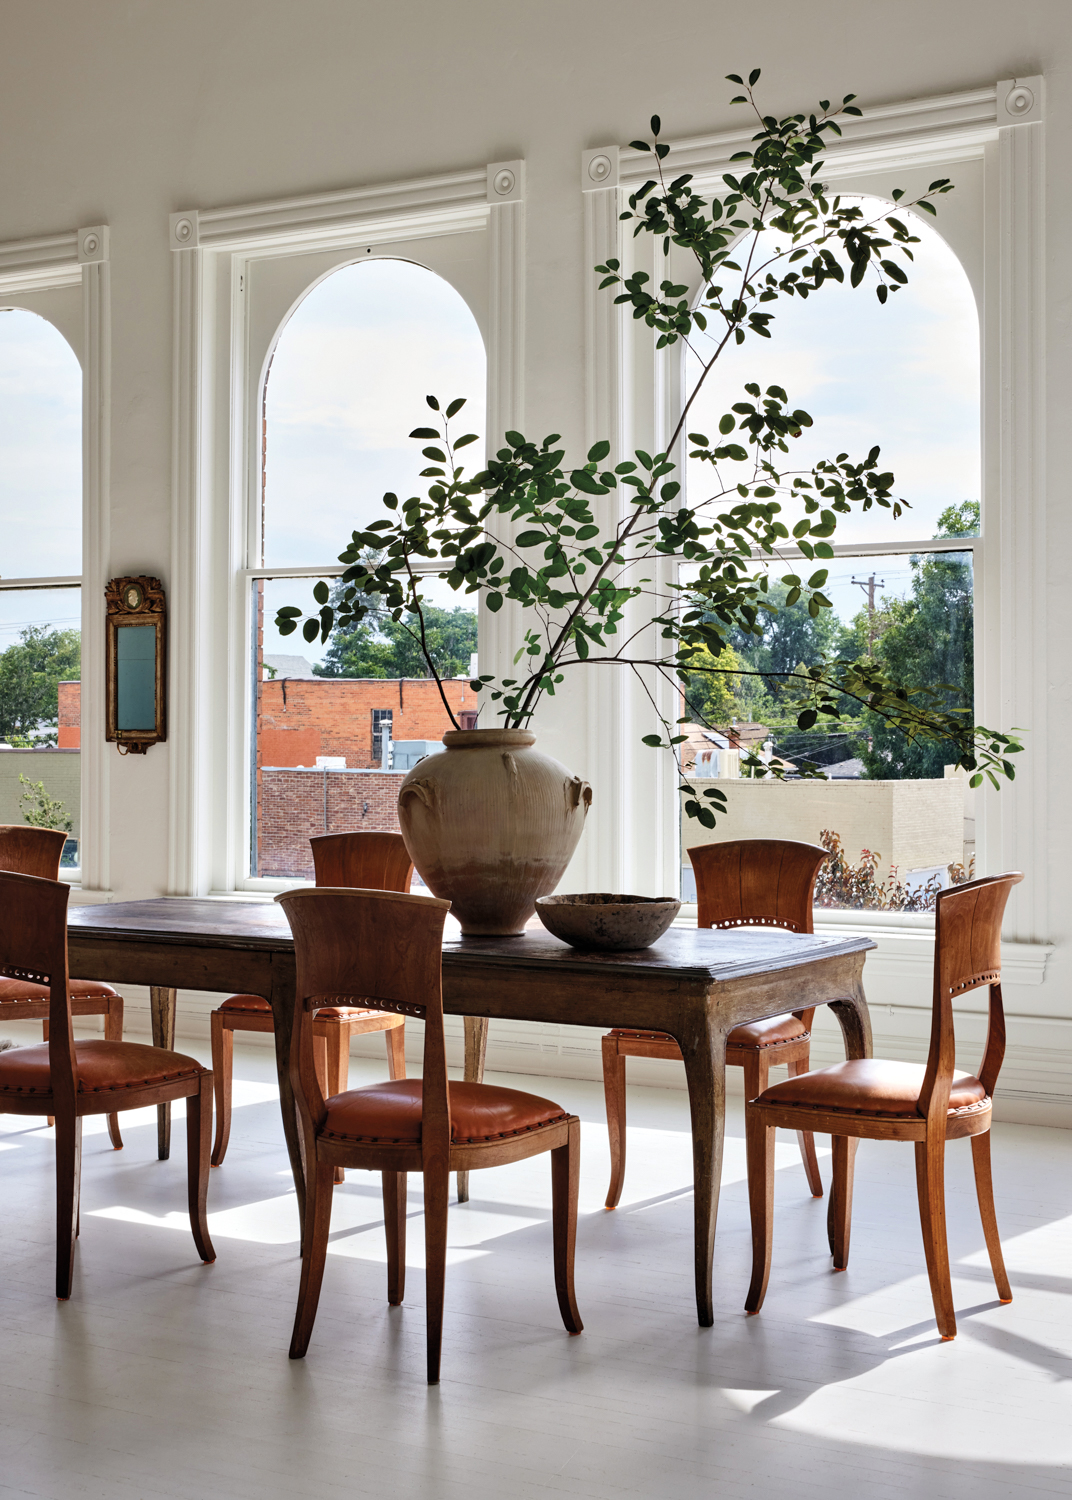 Dark-wood vintage dining table circle by wood-and-leather dining chairs, with tall branches in a vessel on top